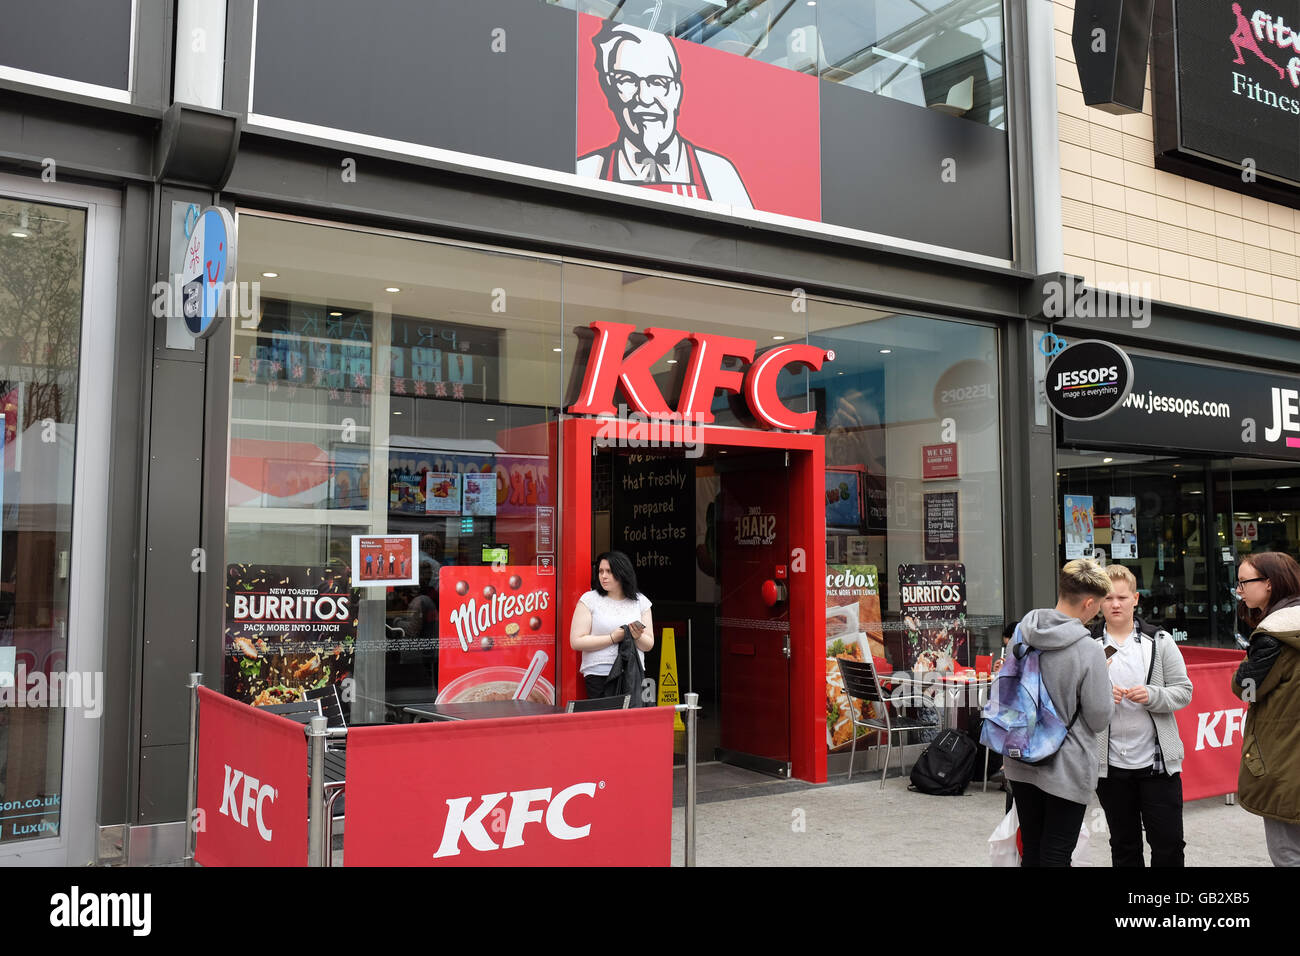 A KFC fast food restaurant in England. Stock Photo